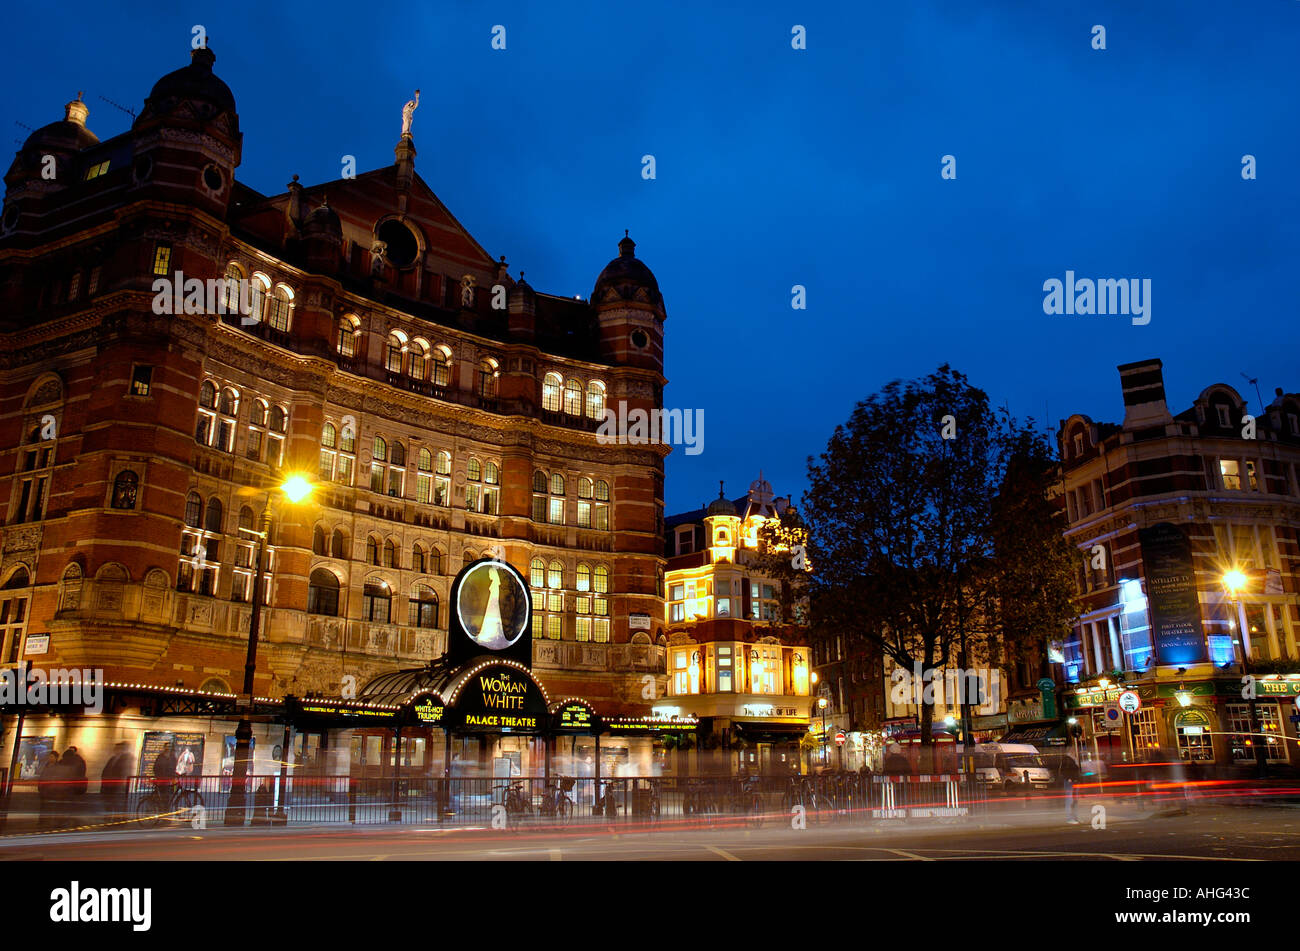 UK, London, The West End, Theatreland, Cambridge Circus, The Palace Theatre Stock Photo